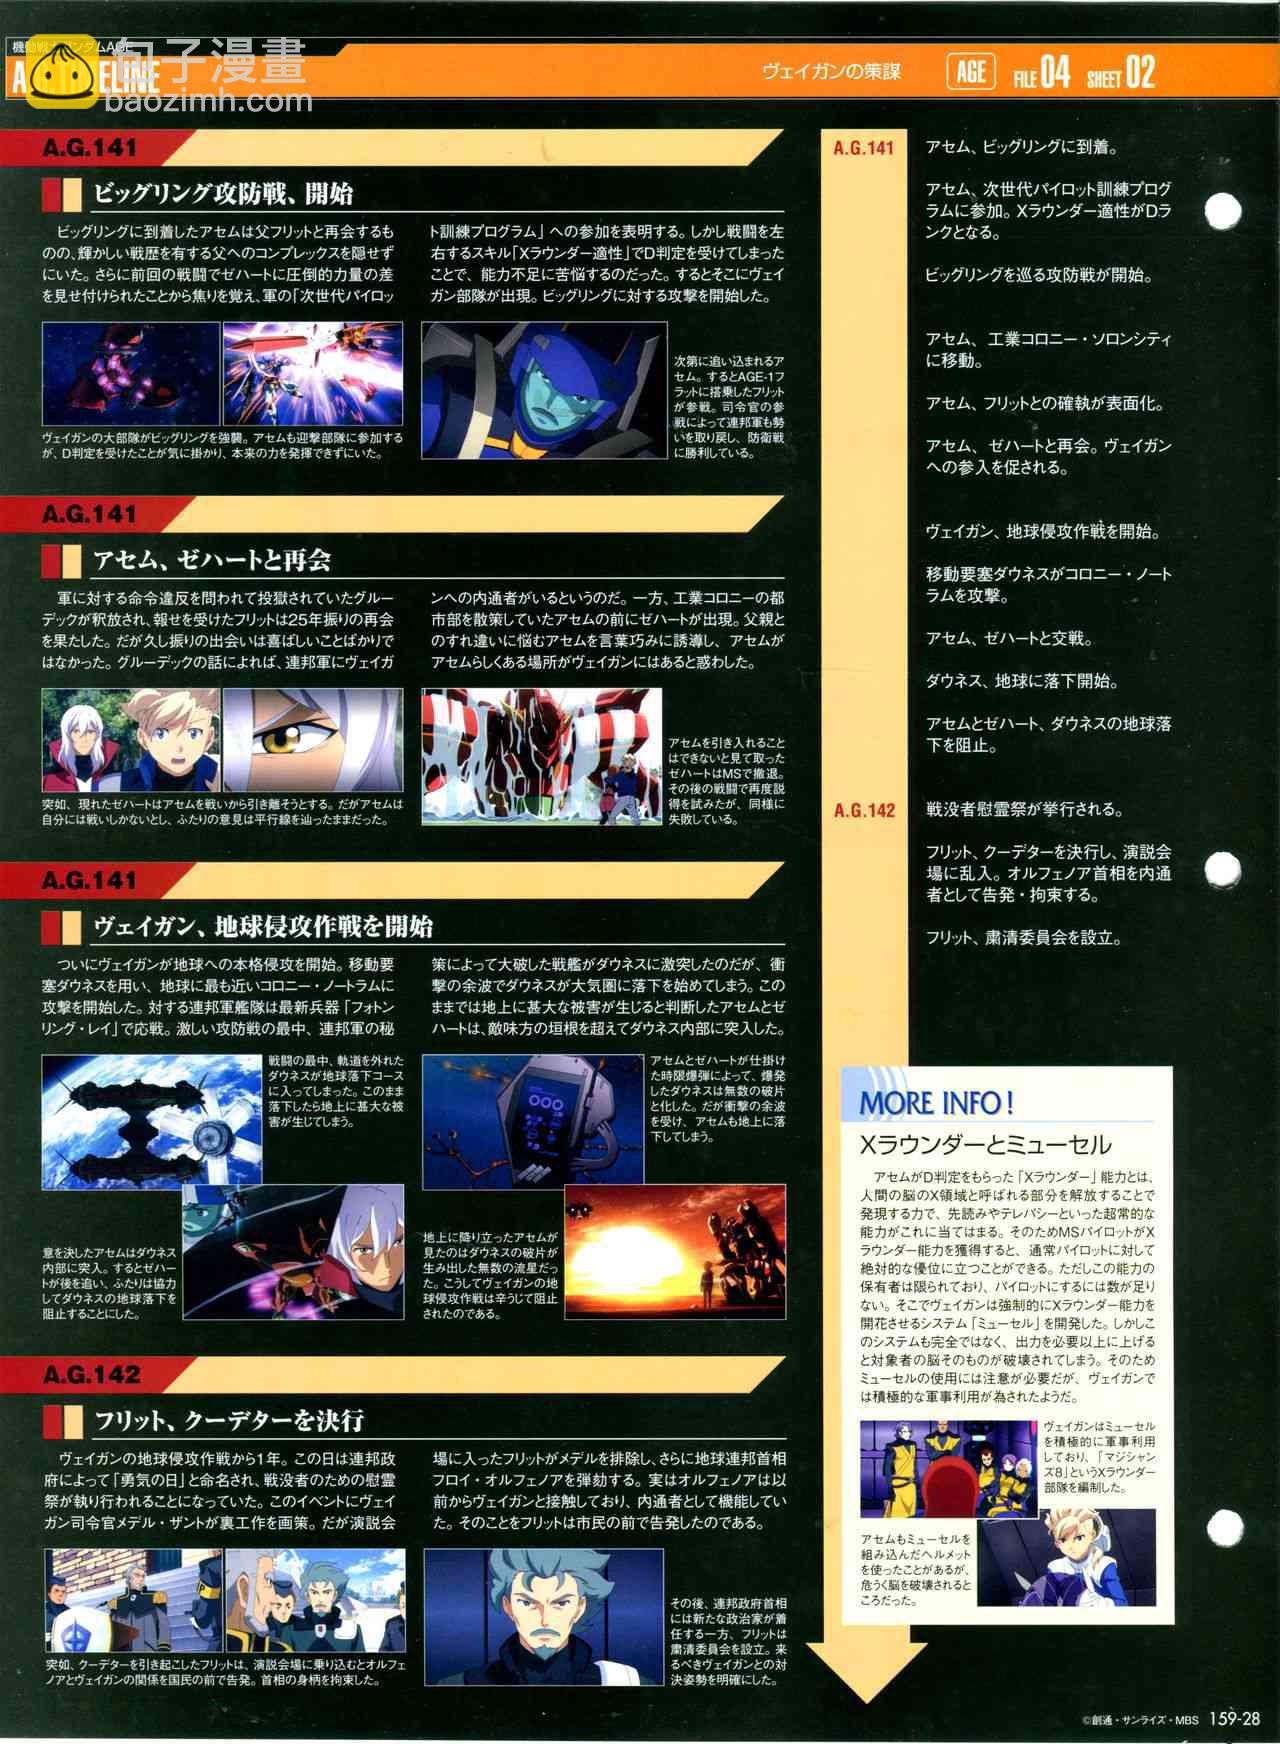 The Official Gundam Perfect File  - 159話 - 2